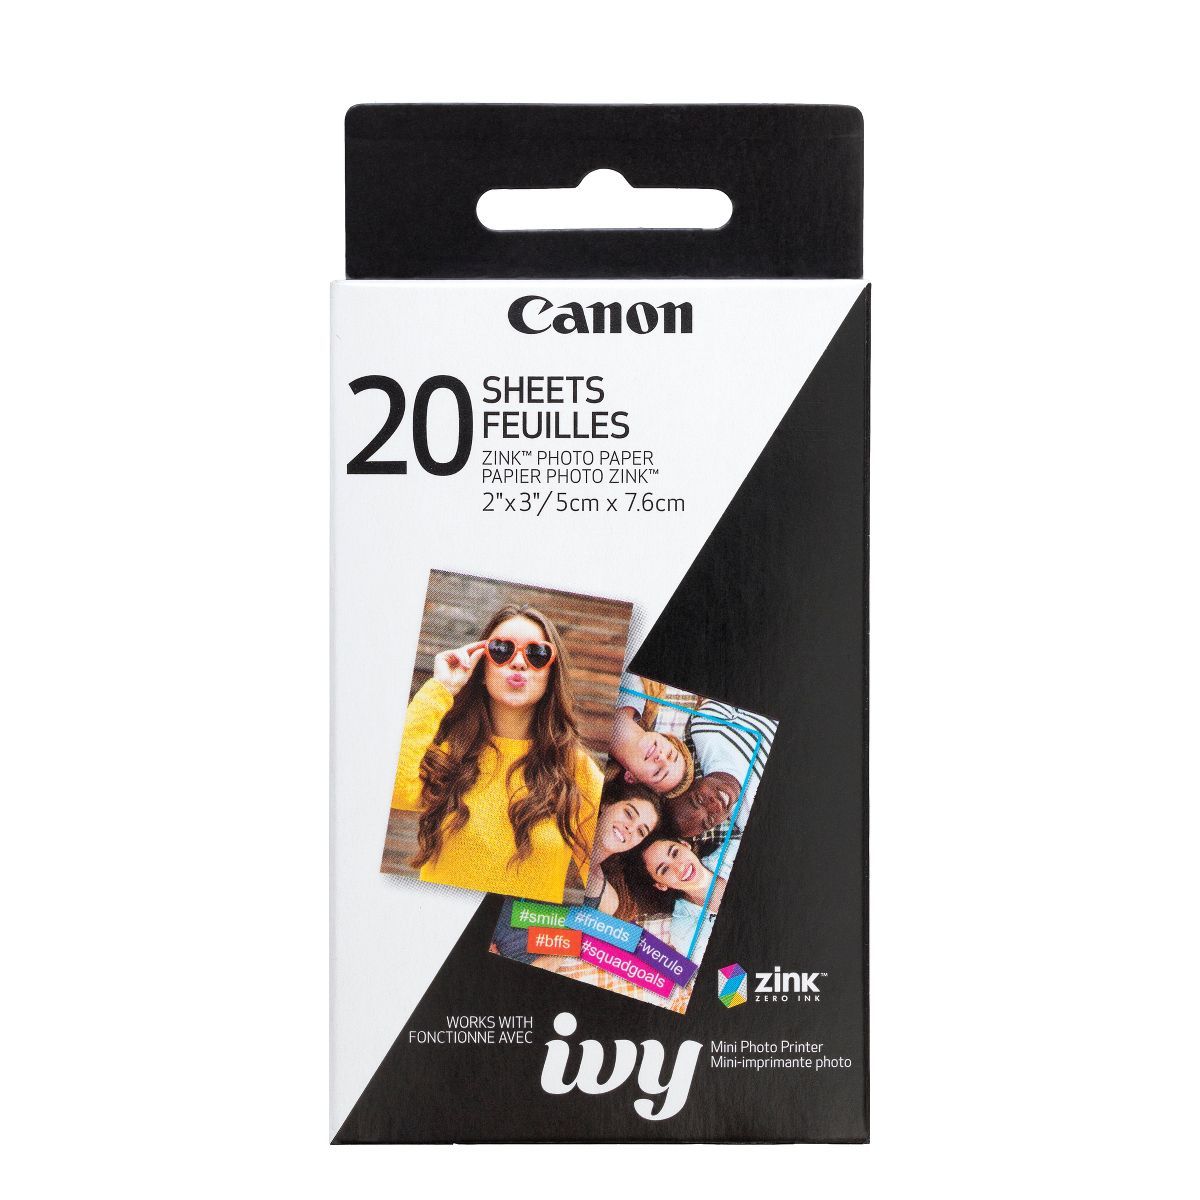 Canon ZINK Photo Paper Pack (20 Sheets) for the IVY Mini Photo Printer | Target